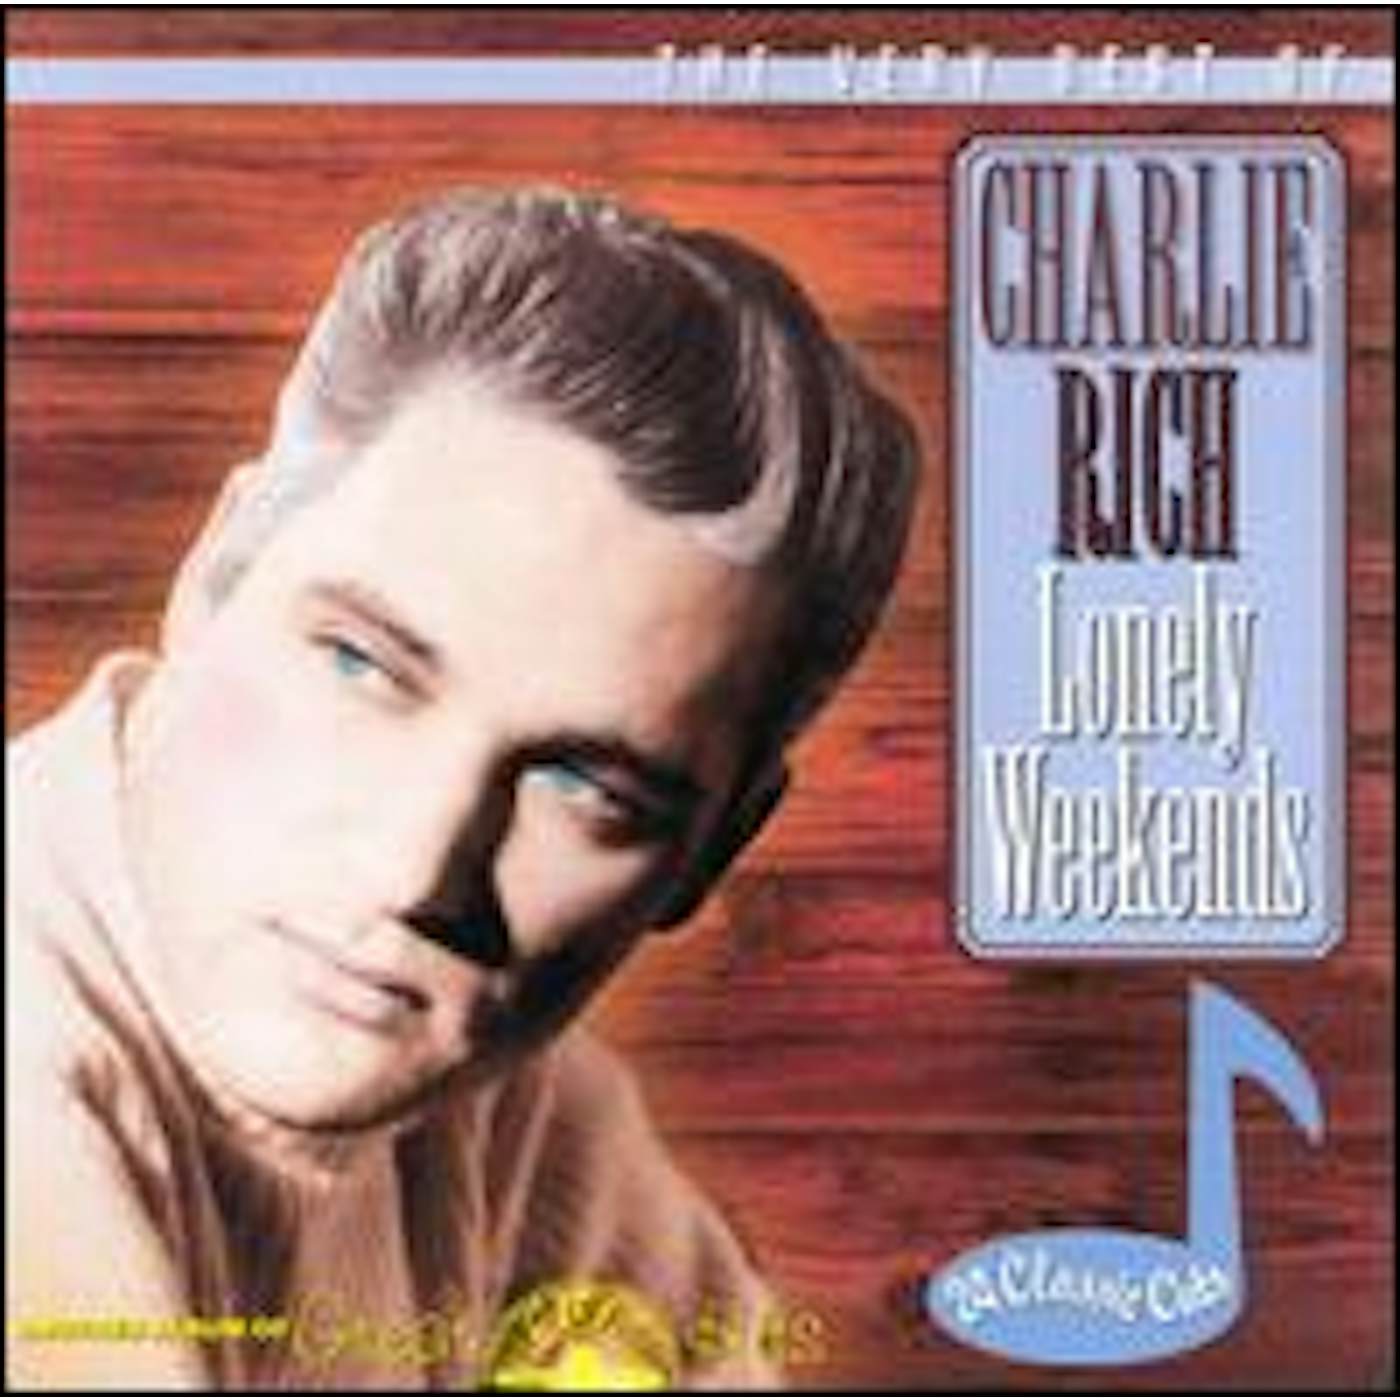 Charlie Rich LONELY WEEKENDS: VERY BEST OF CD